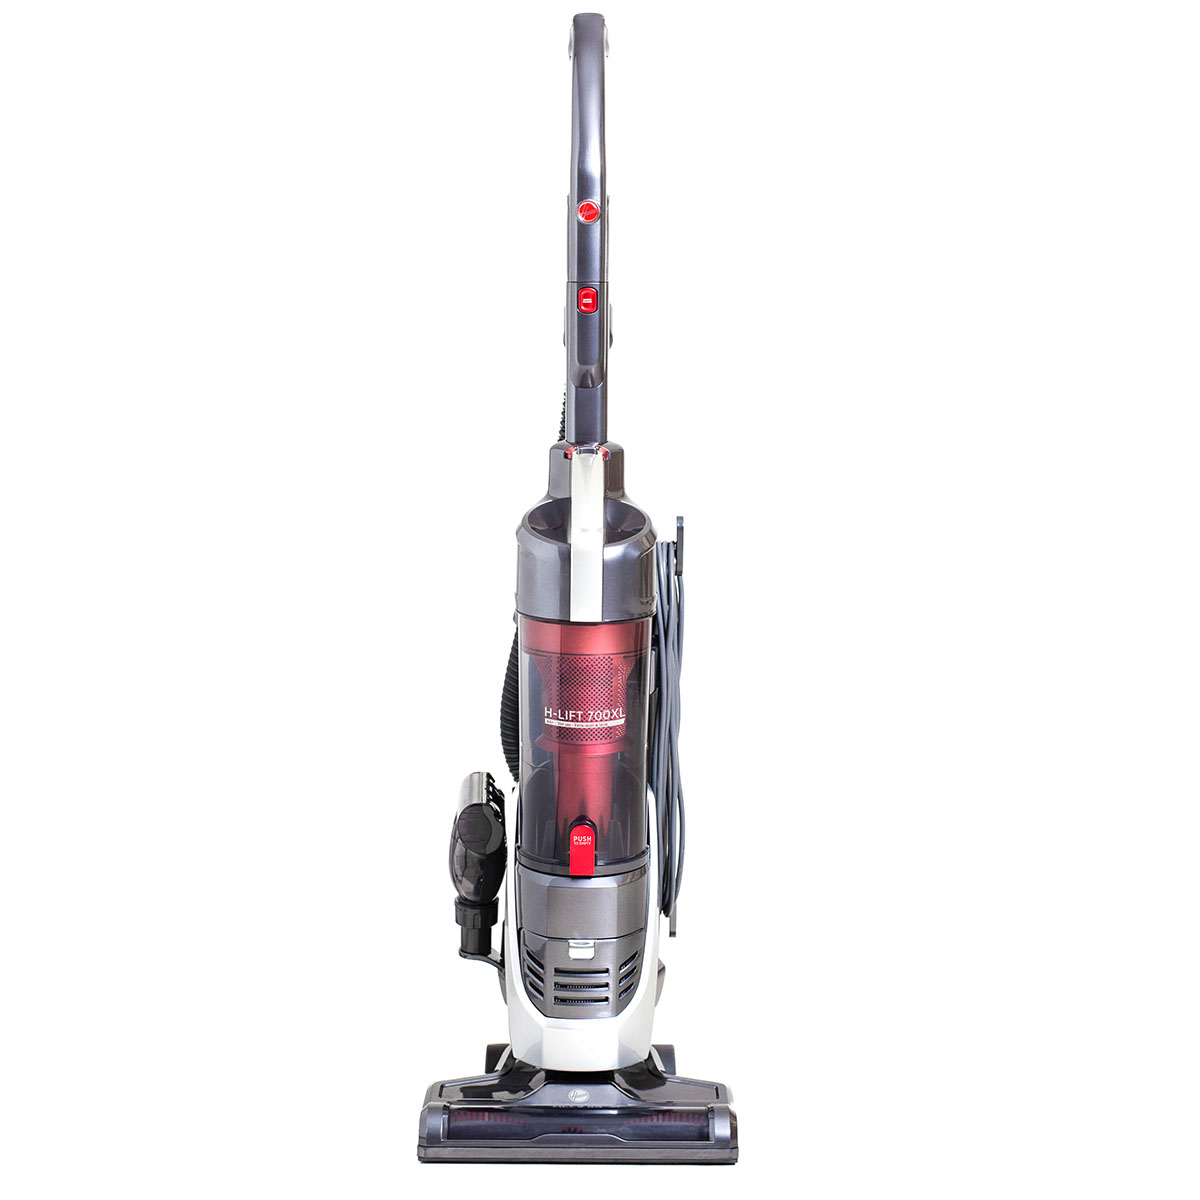 Hoover HL700PXL H-Lift 700 Pets XL 3-in-1 Multifunctional Upright Vacuum Cleaner - Grey and Red